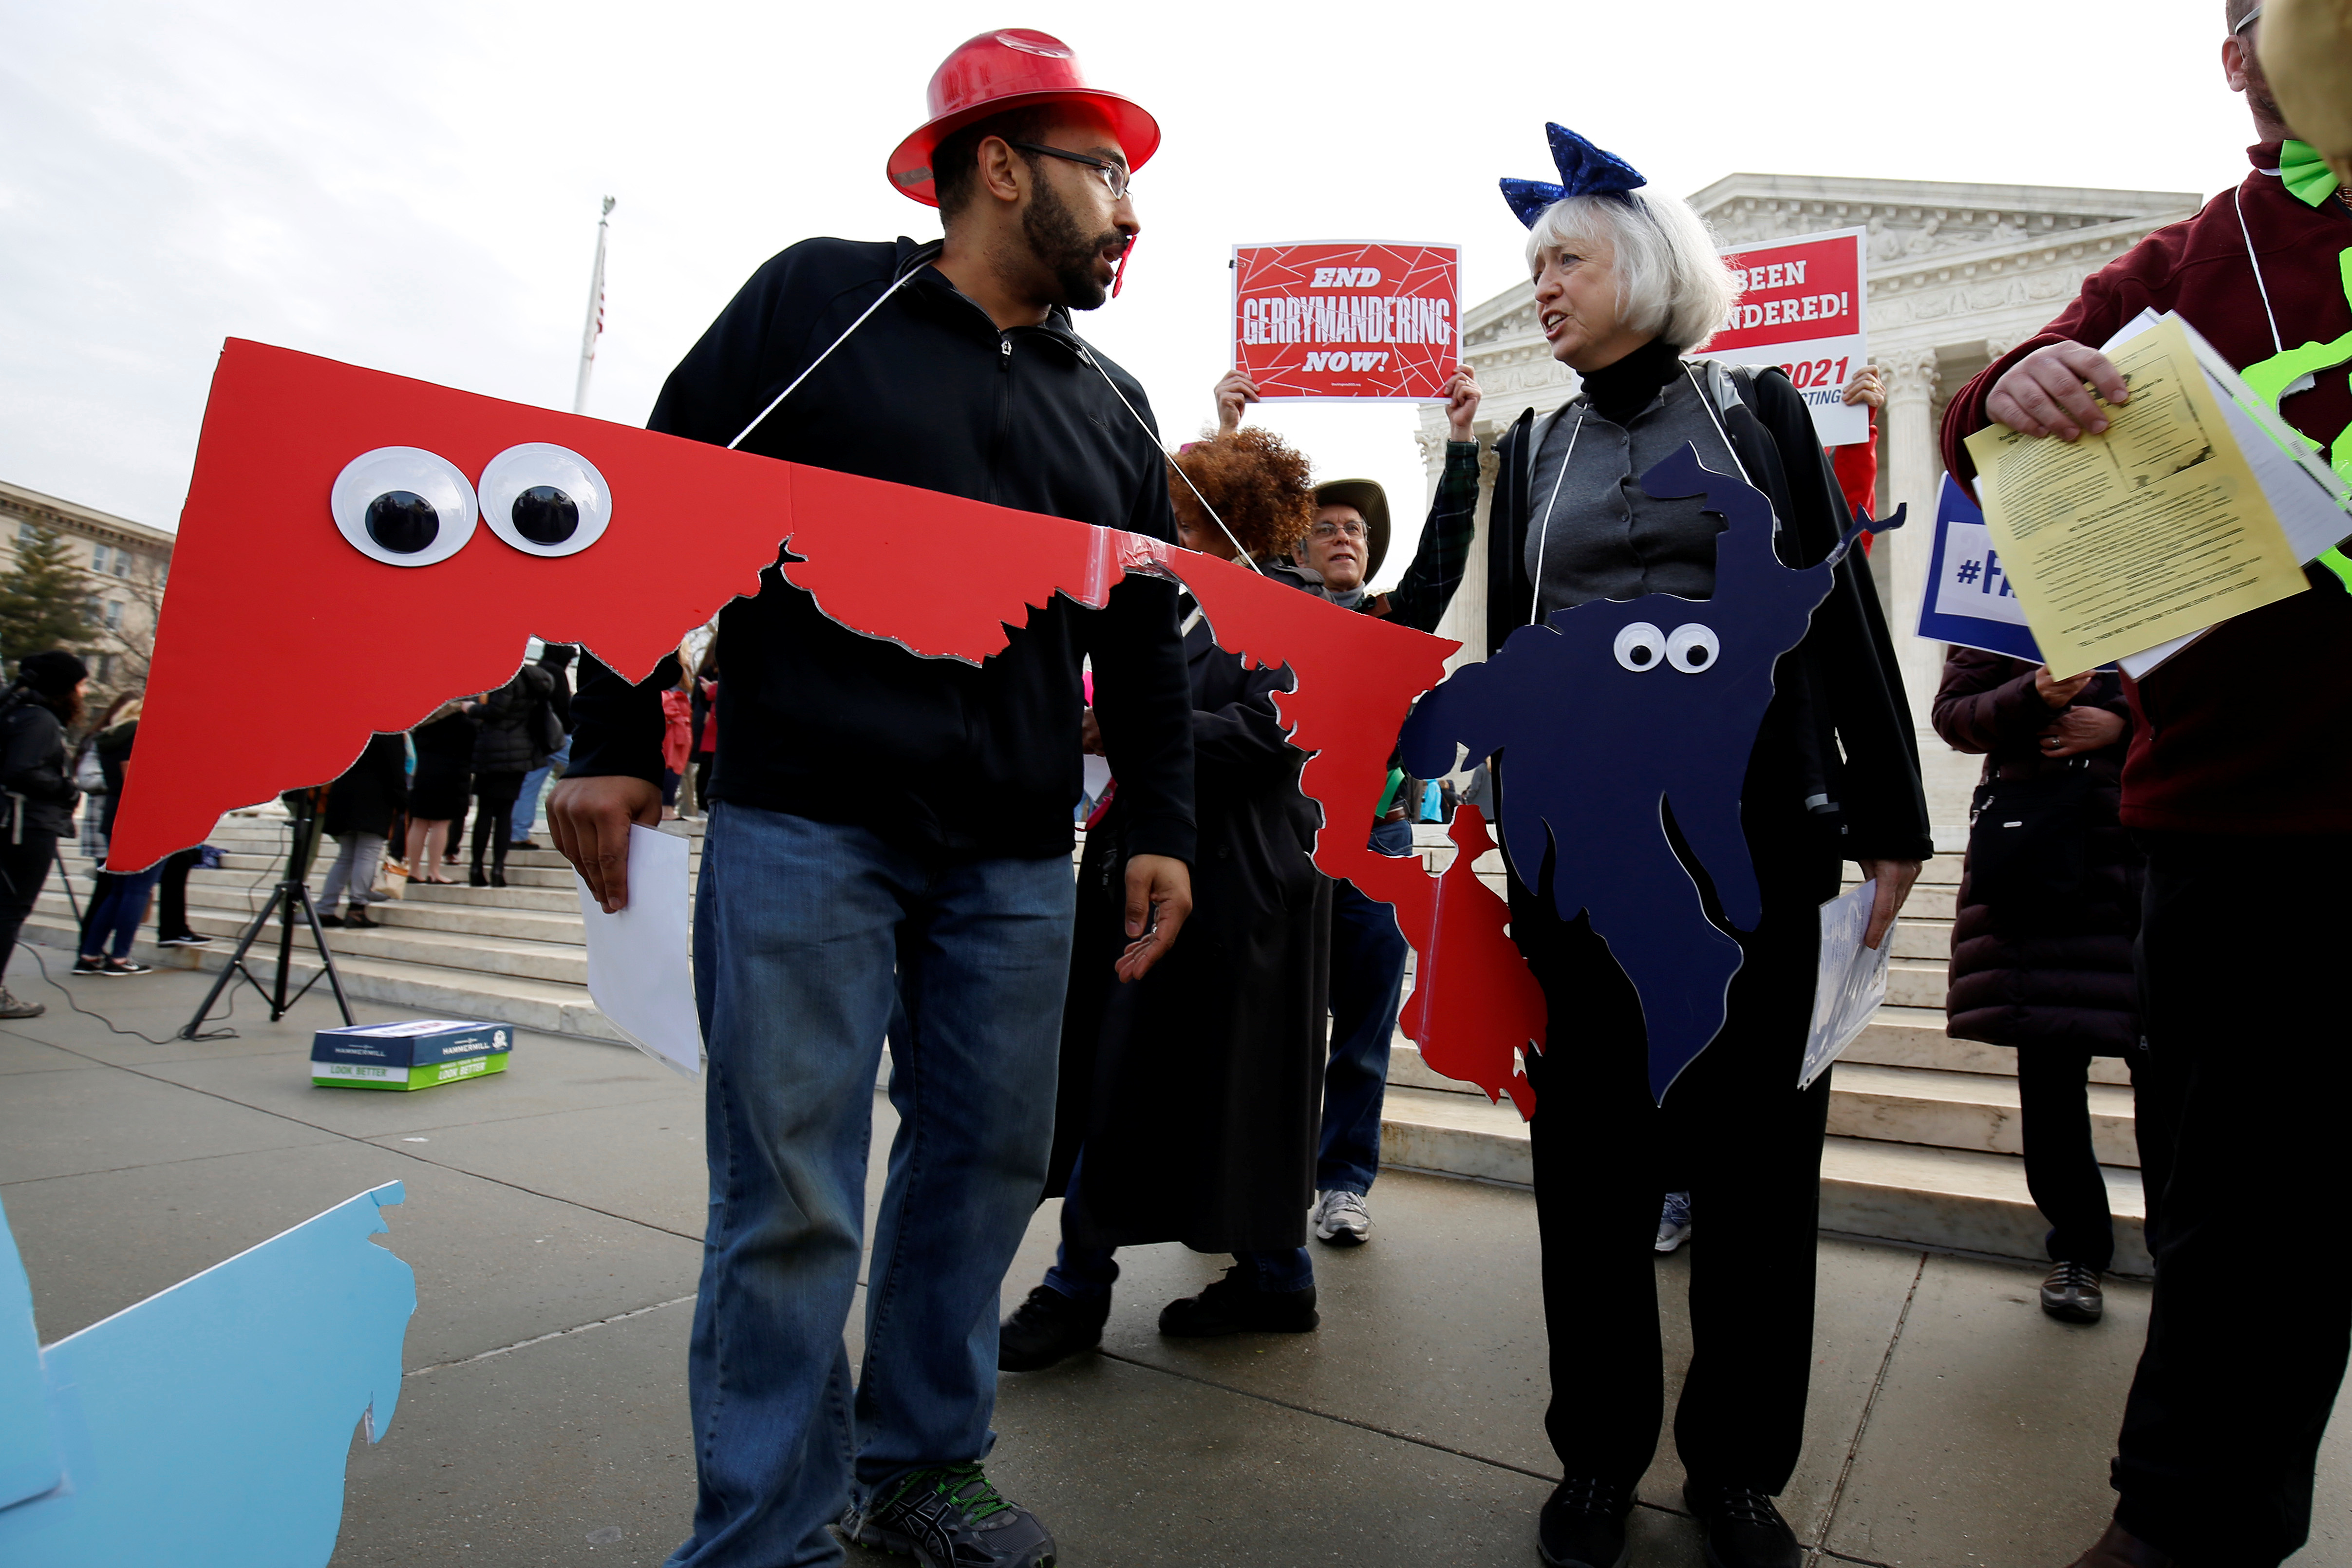 Demonstrators rally with cut-outs of congressional districts in front of the Supreme court before oral arguments on Benisek v. Lamone, a redistricting case on whether Democratic lawmakers in Maryland unlawfully drew a congressional district in a way that would prevent a Republican candidate from winning, in Washington, U.S., March 28, 2018. REUTERS/Joshua Roberts